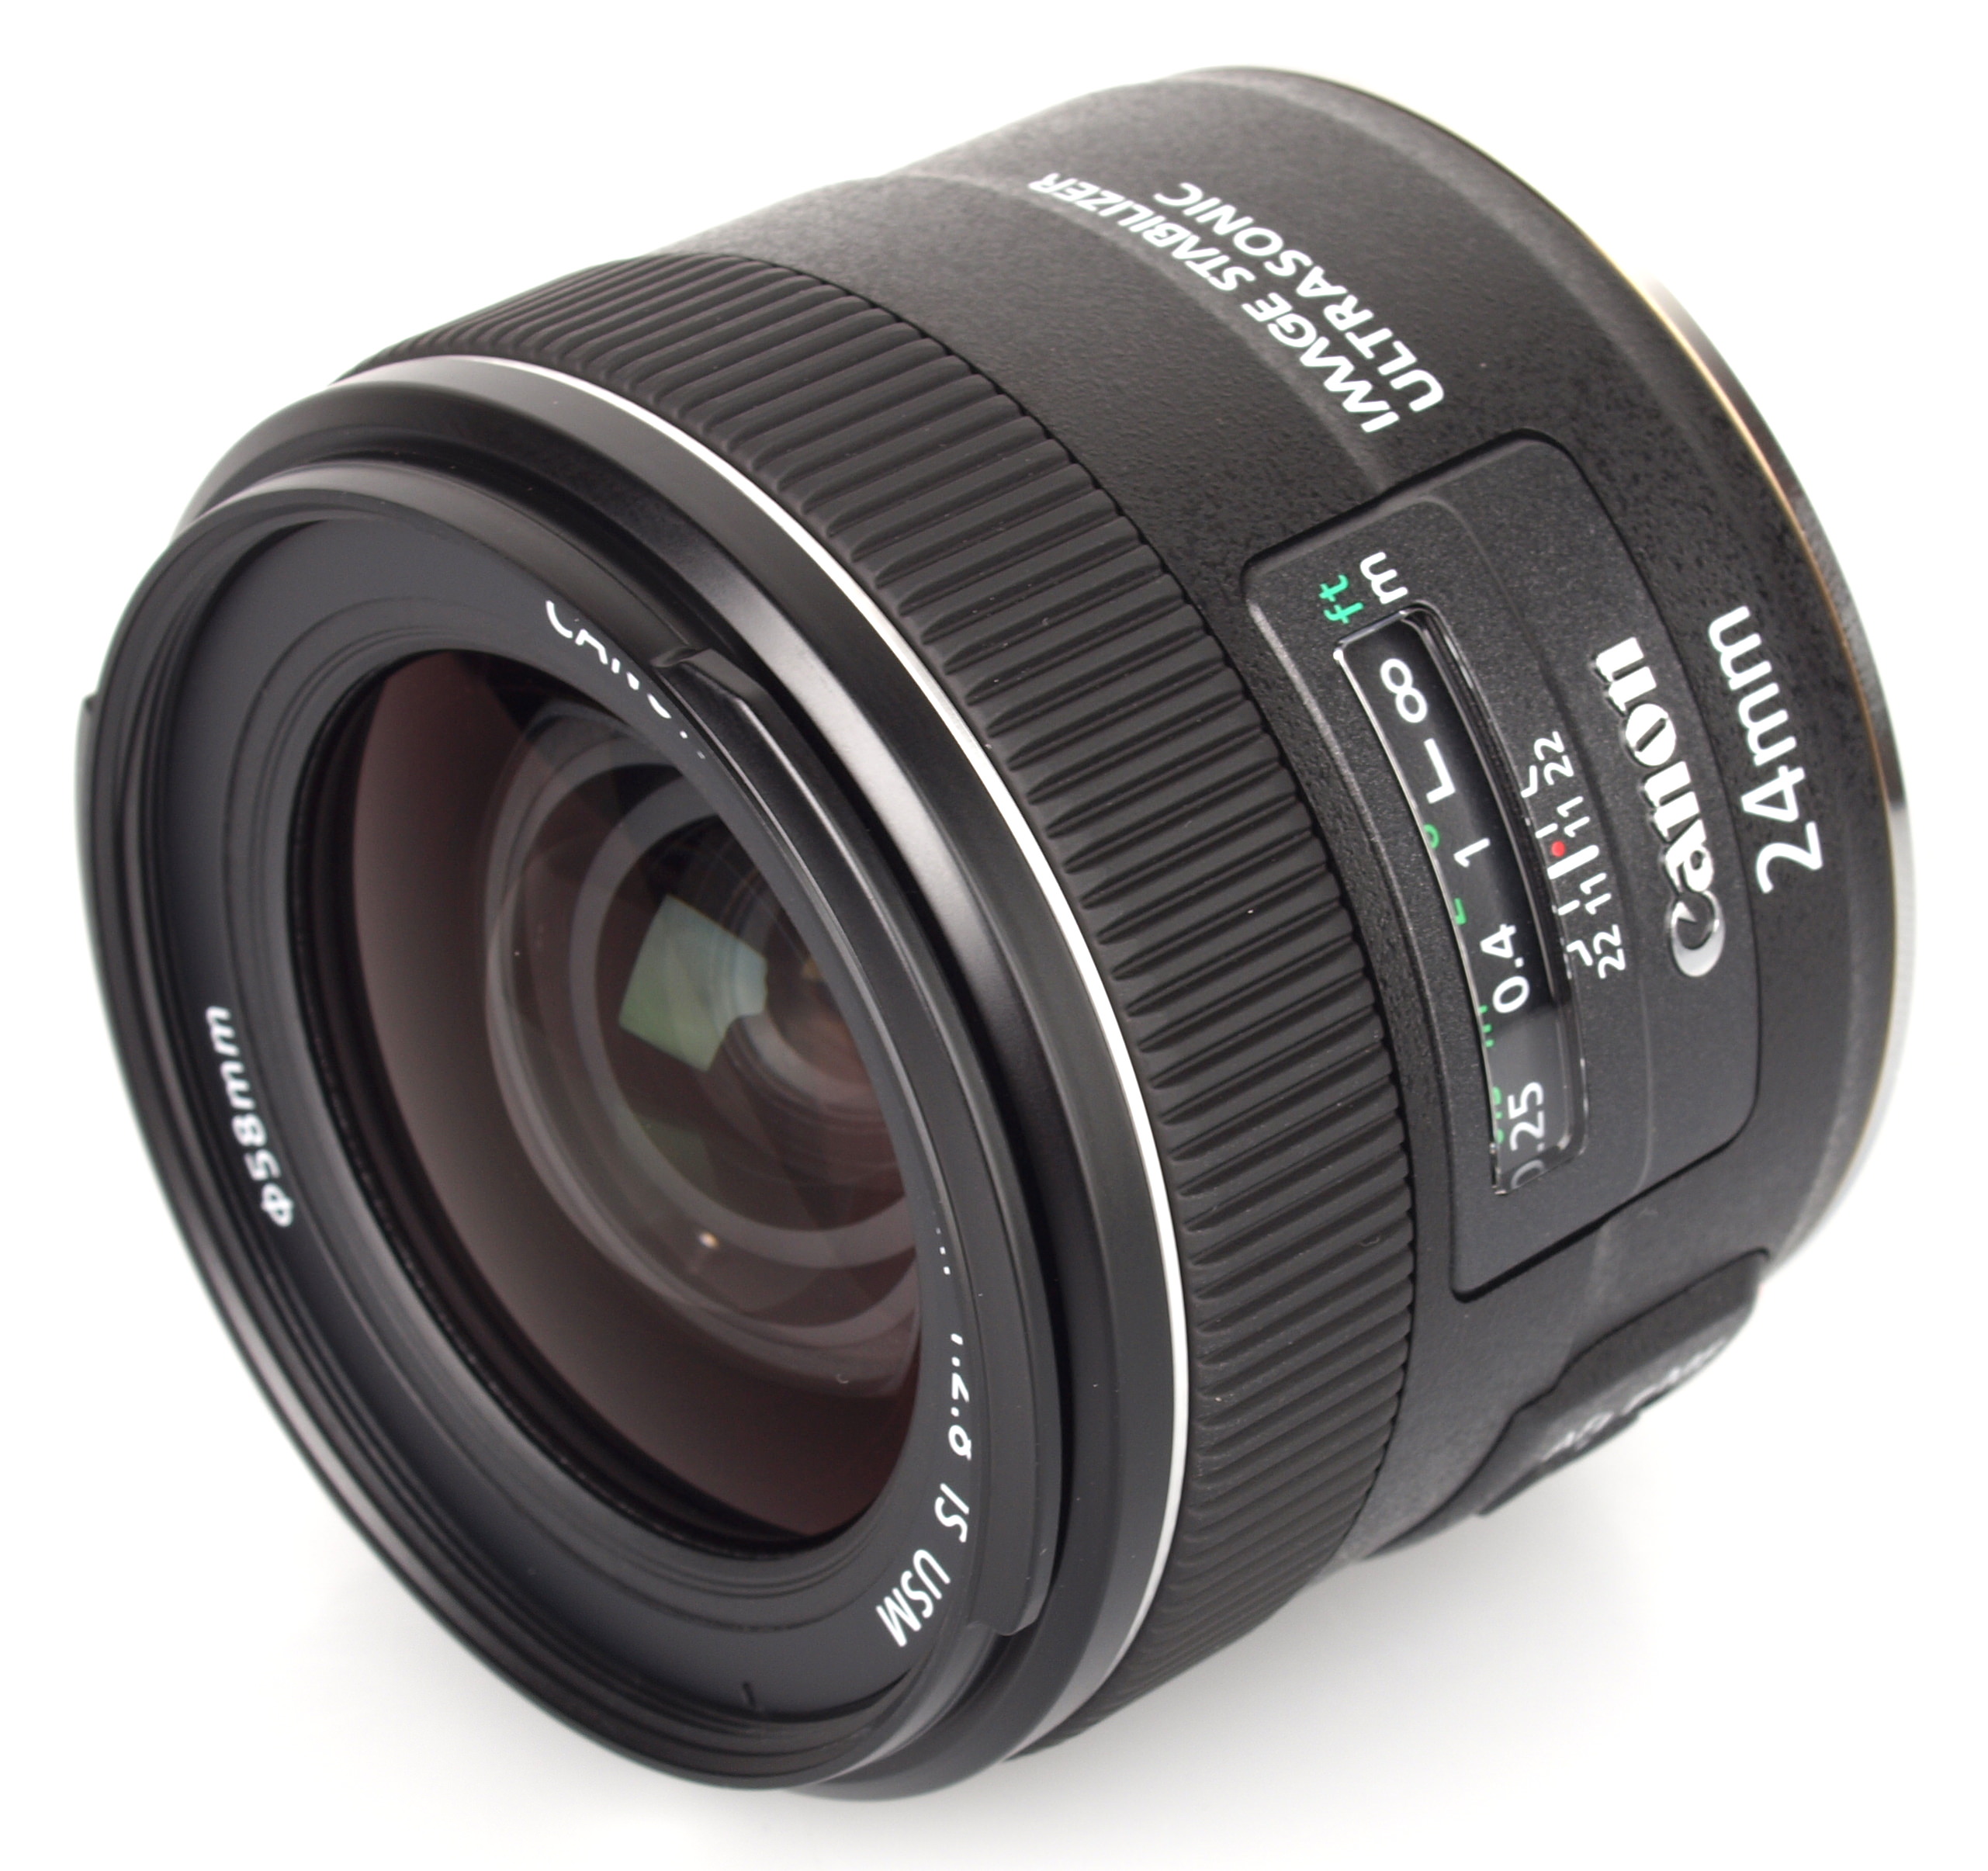 Canon EF 24mm f/2.8 IS USM Lens Review